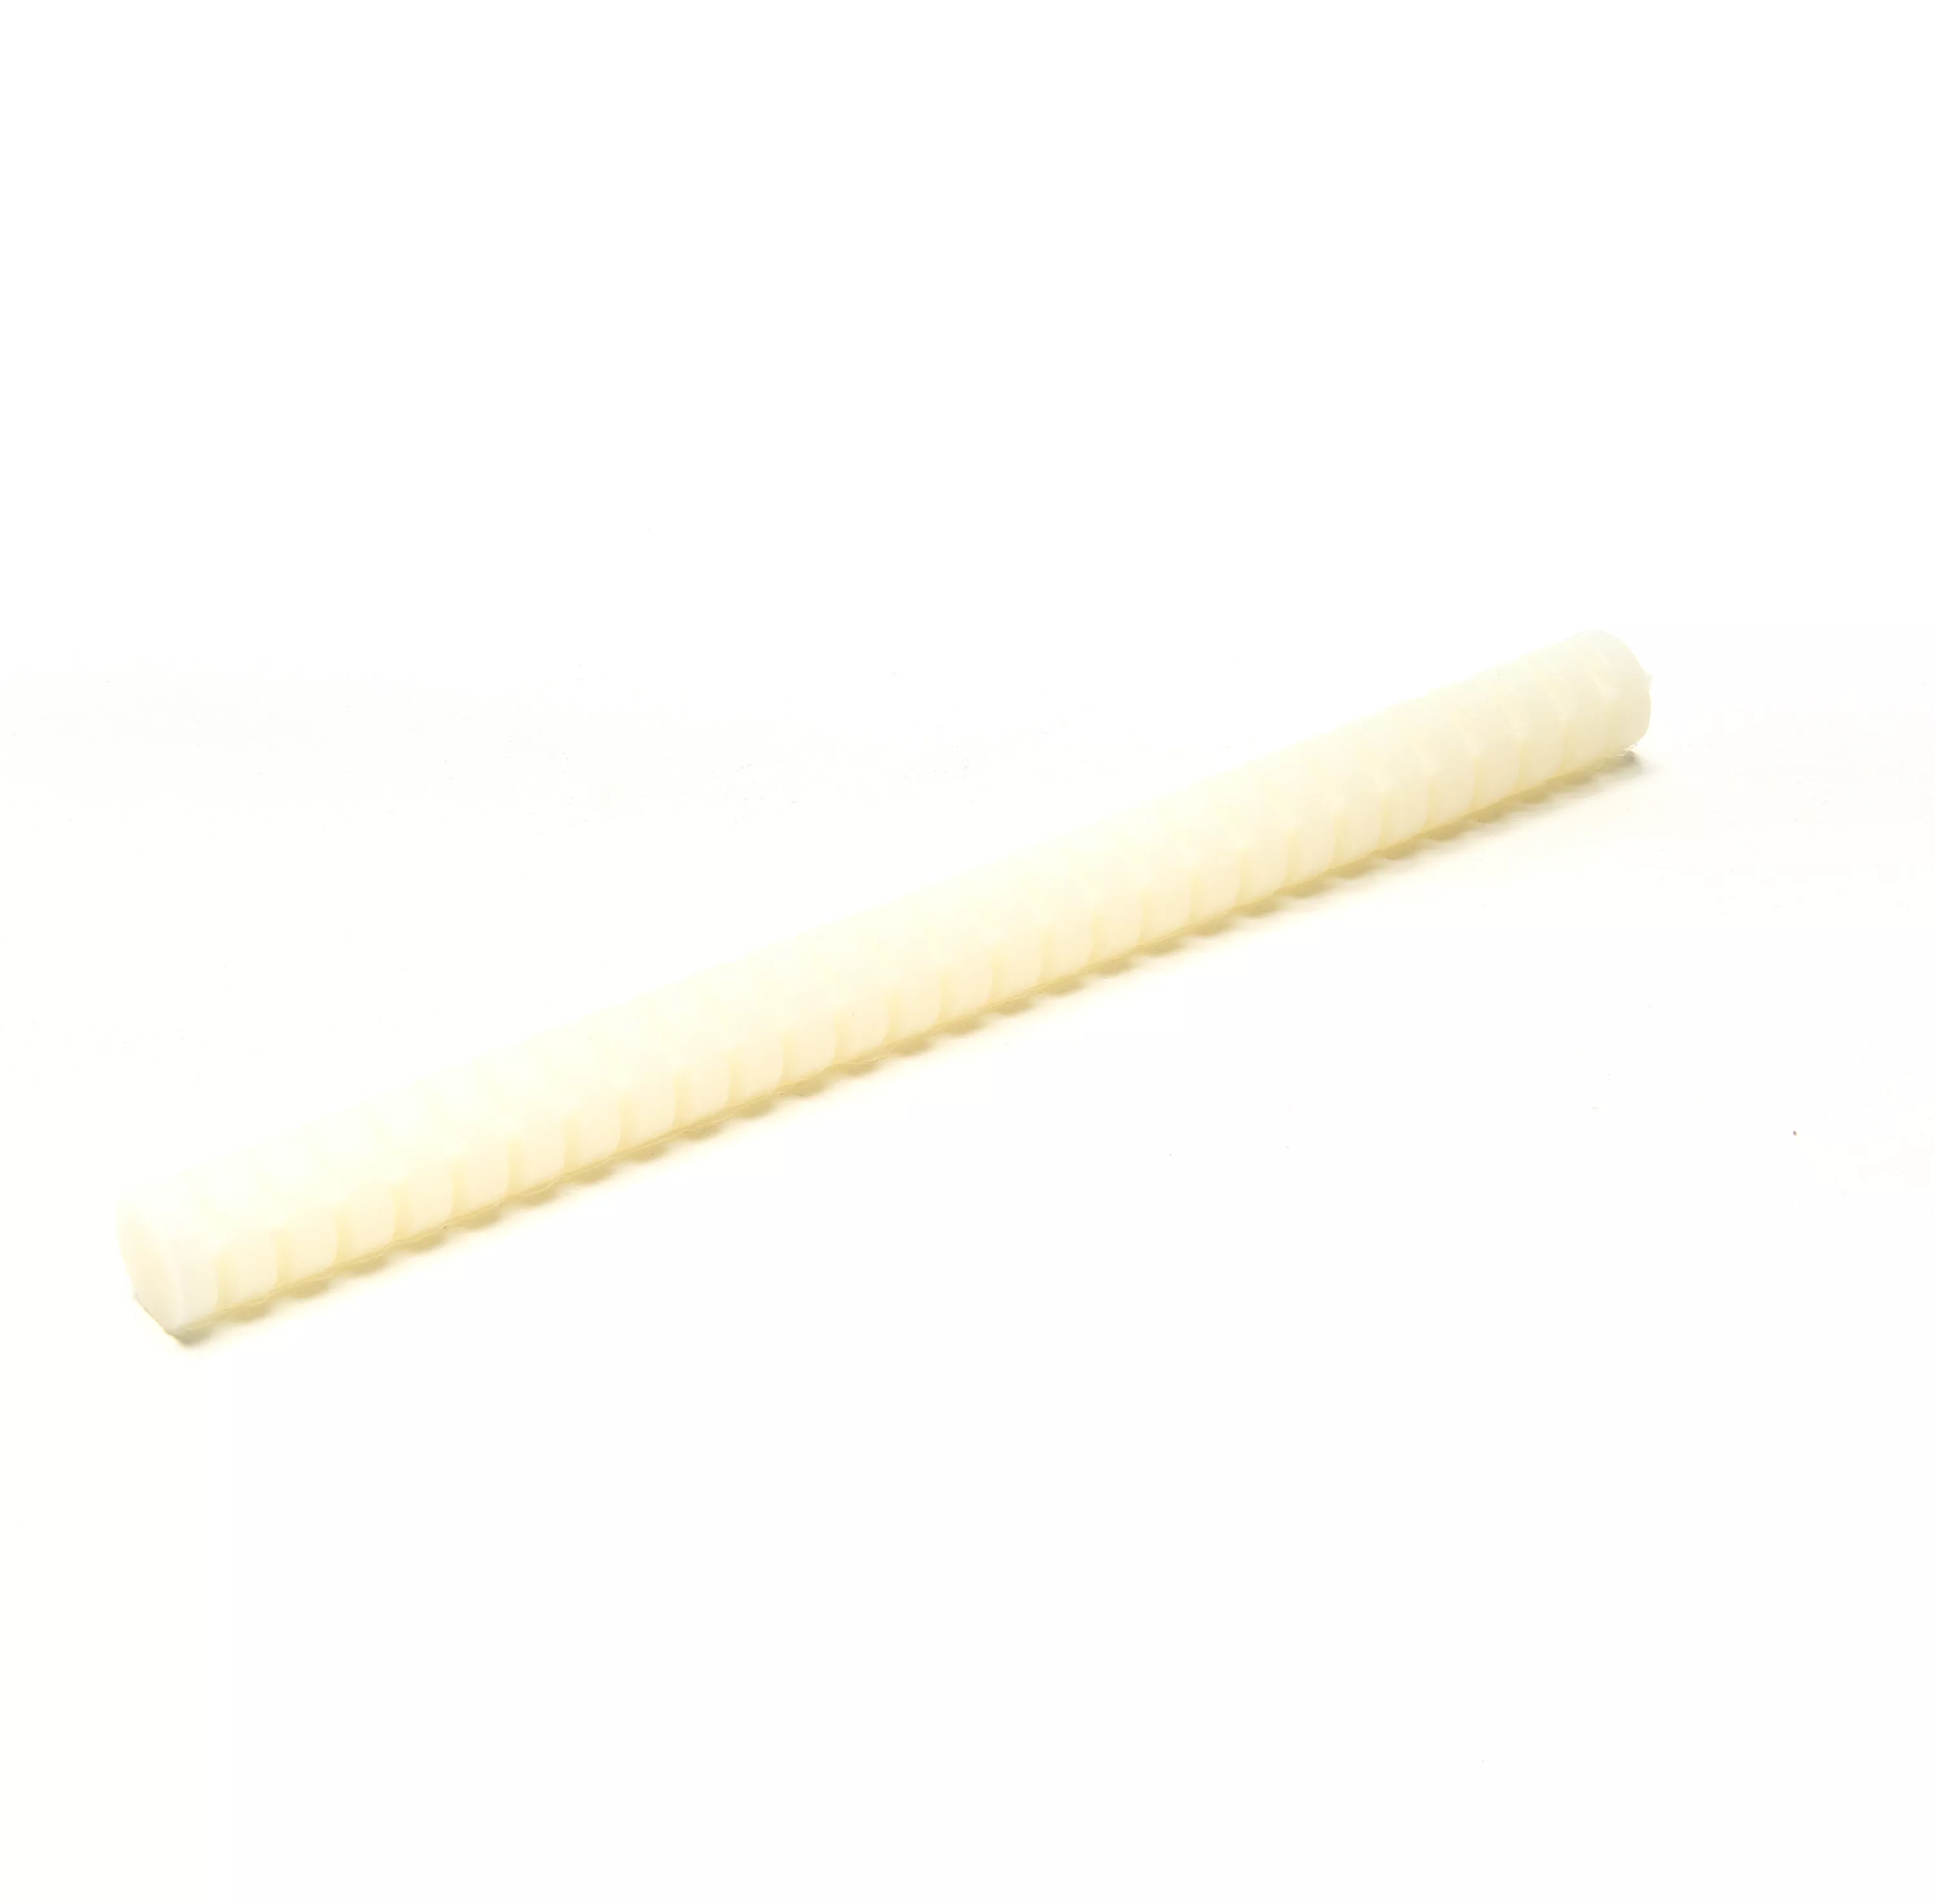 3M™ Hot Melt Adhesive 3748Q, Off-White, 5/8 in x 8 in, 11 lb, Case